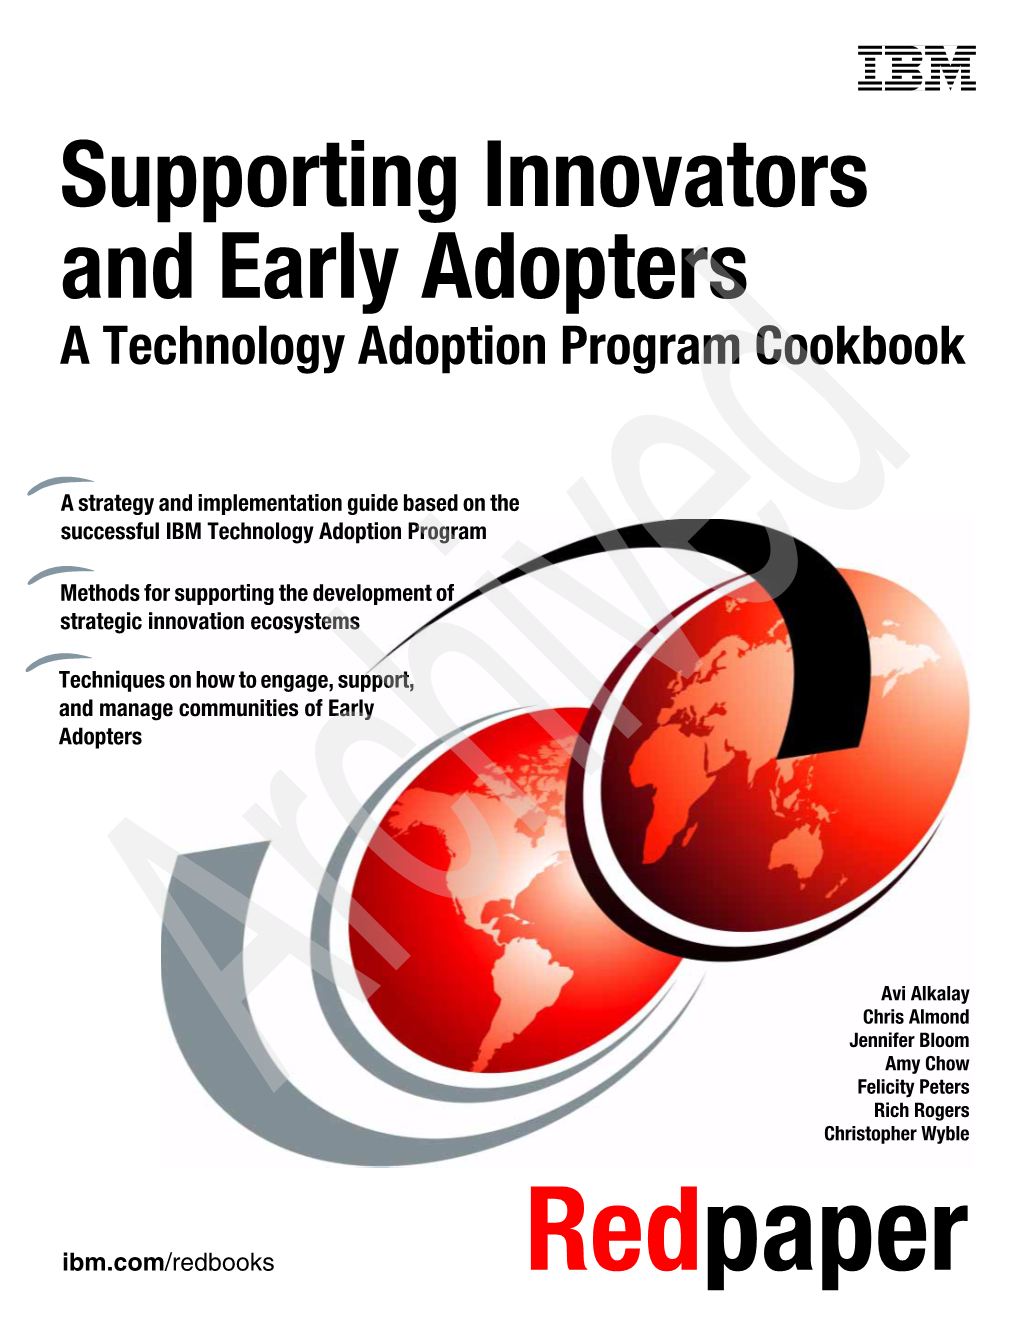 Supporting Innovators and Early Adopters a Technology Adoption Program Cookbook